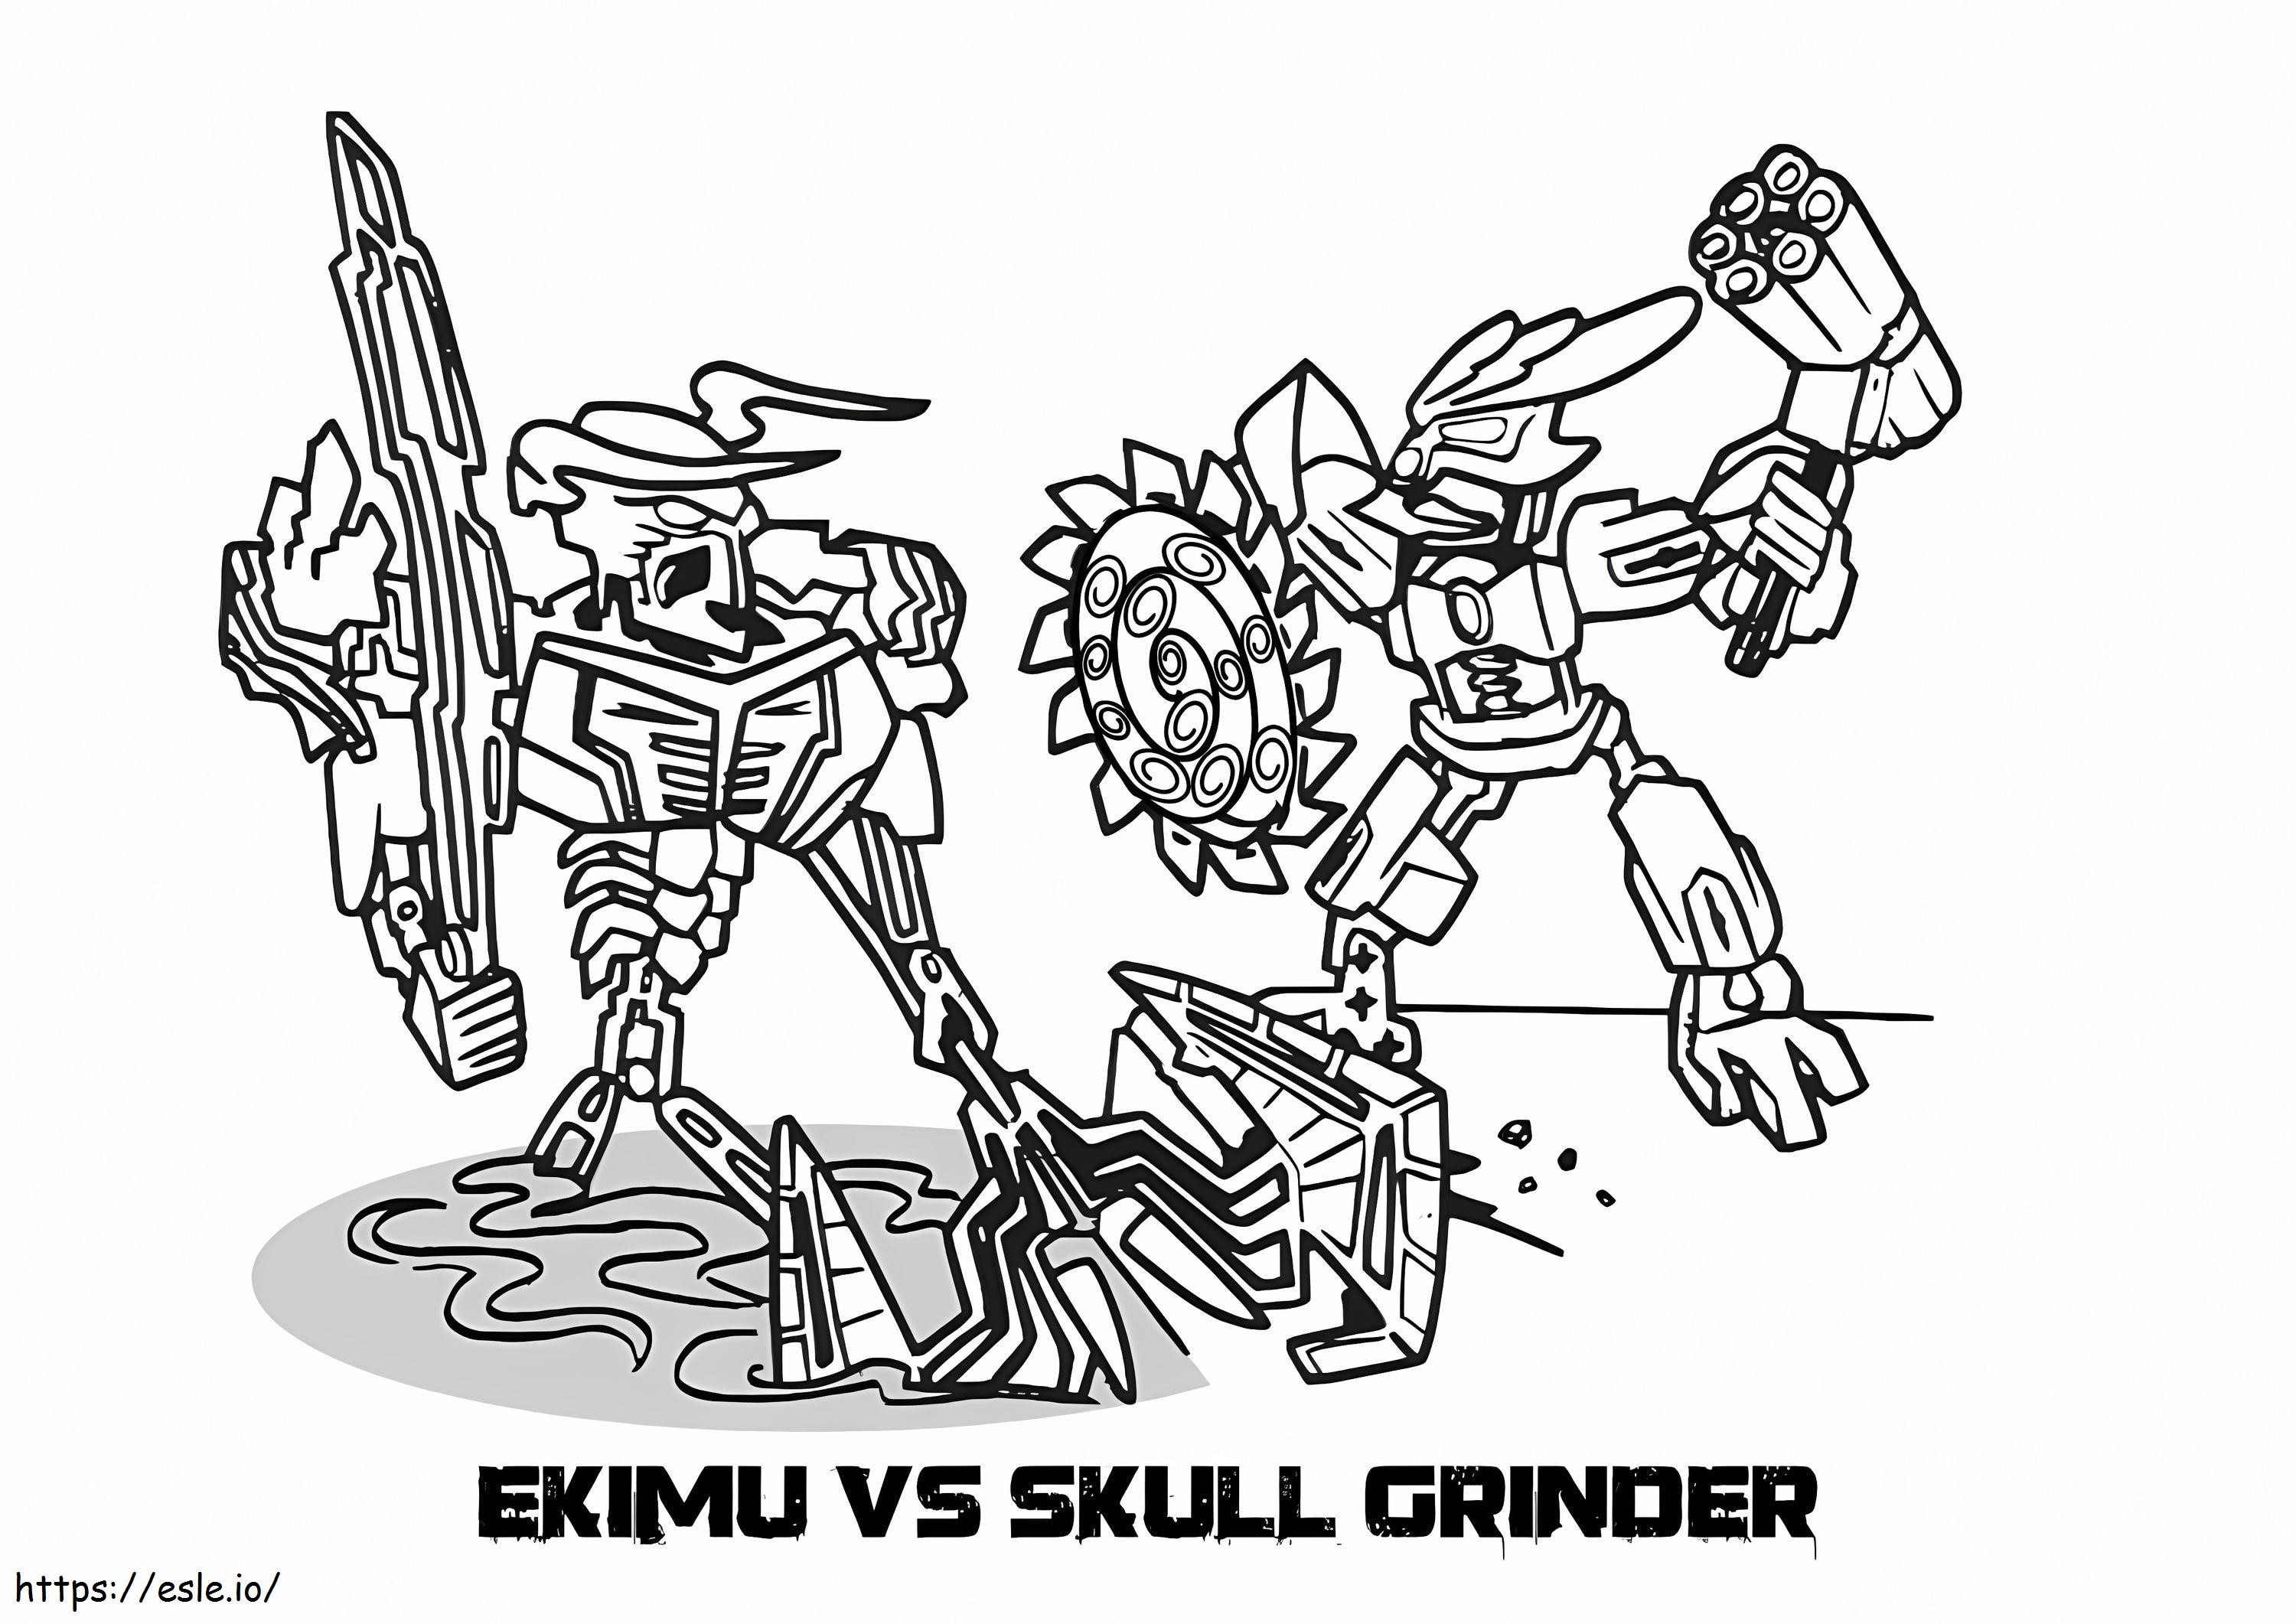 Toys Bionicle coloring page